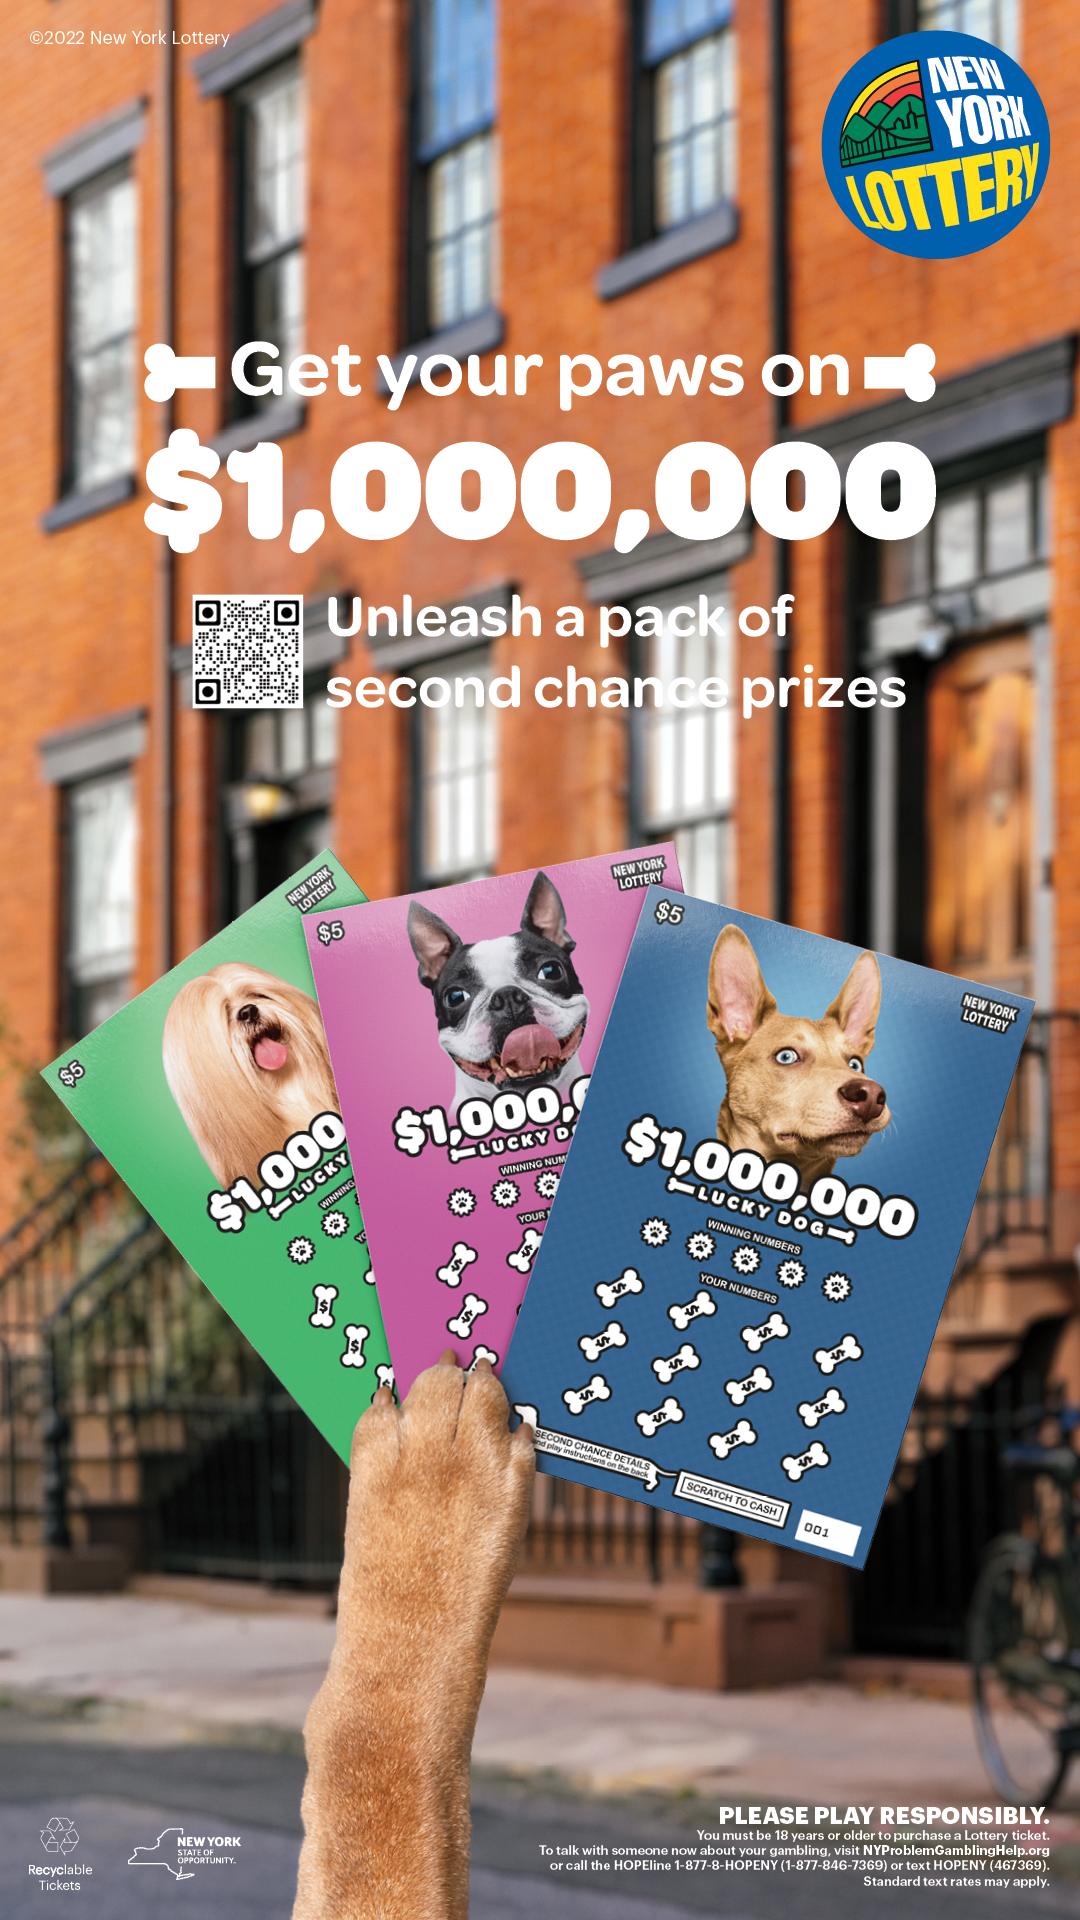 100433_H21LOLNYD_377_NYL_LuckyDog_JCD_DigitalShelters_1080x1920.png